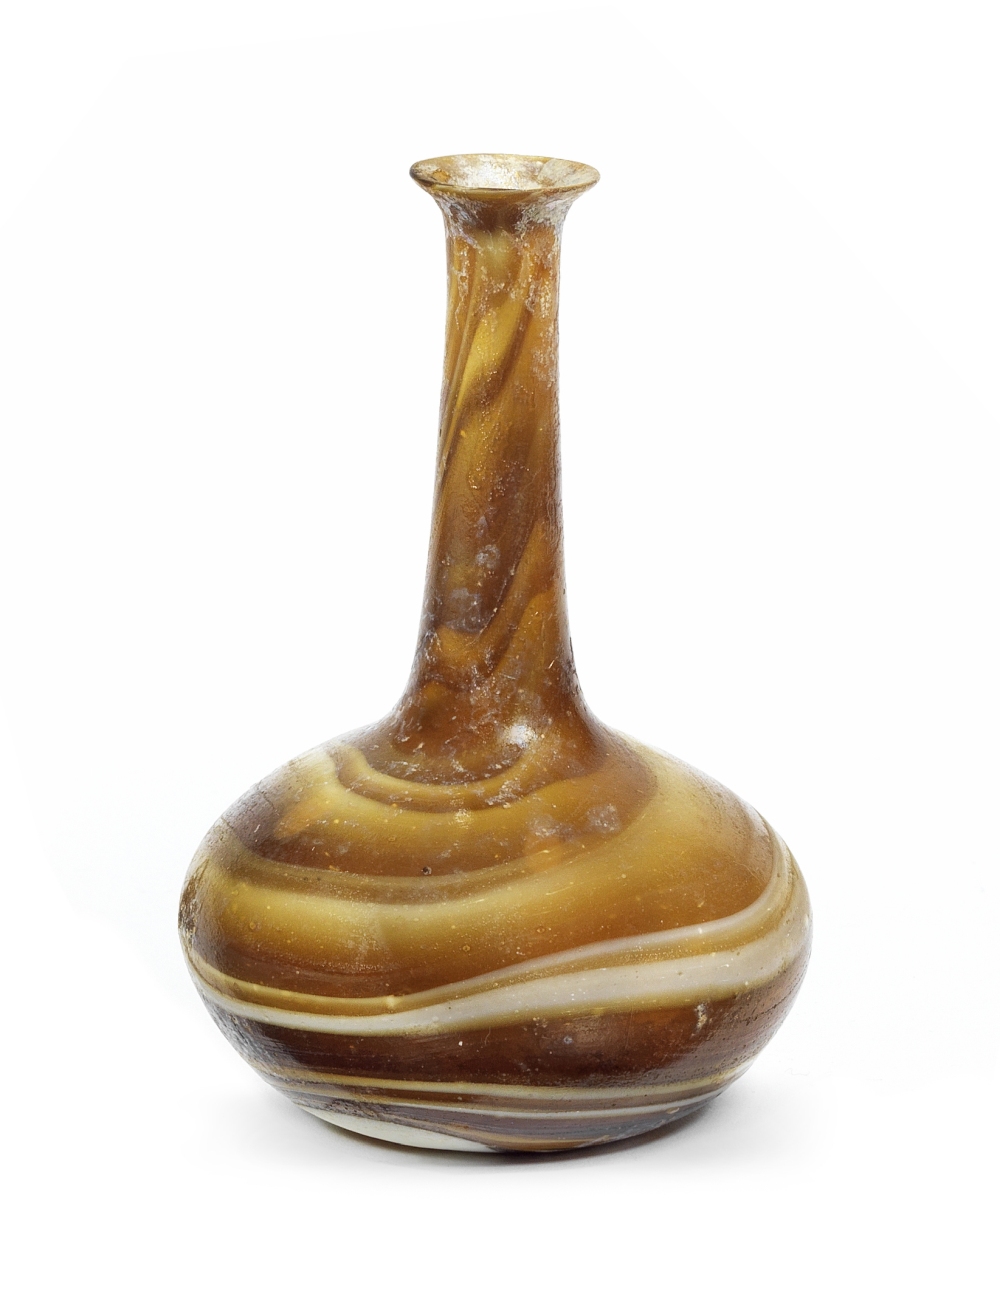 A Roman amber and white marbled glass unguentarium